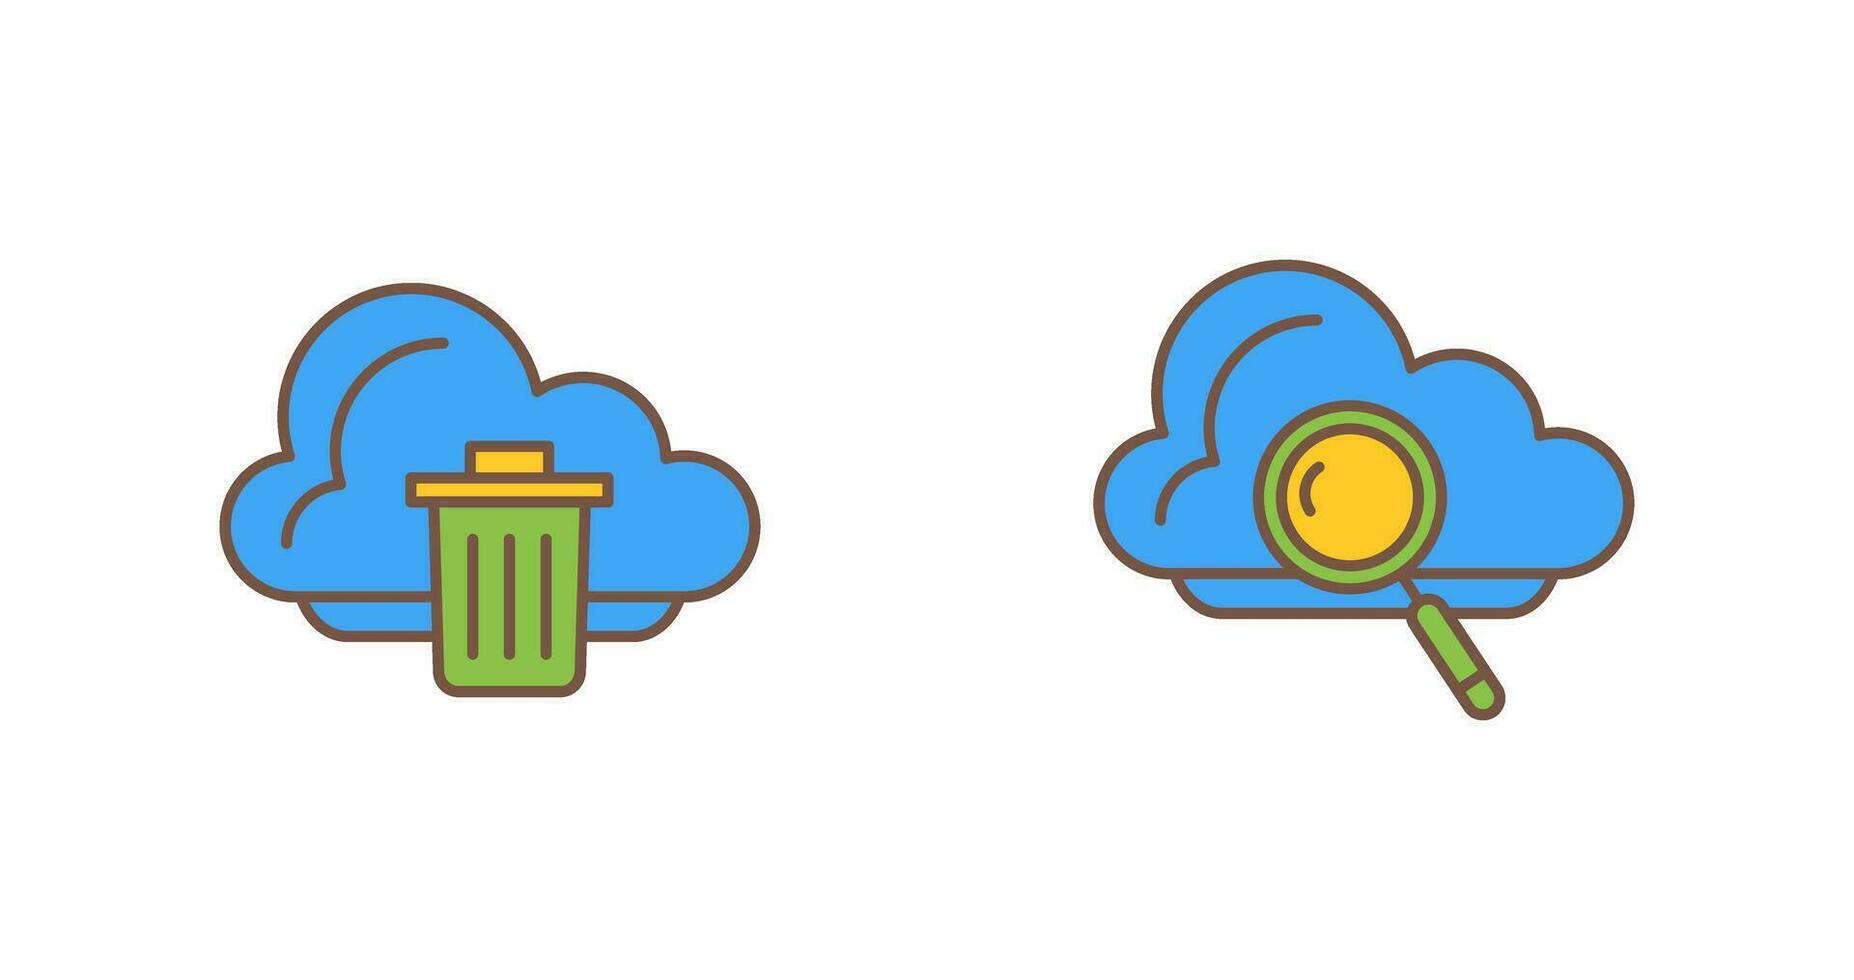 Trash and Magnipying Icon vector